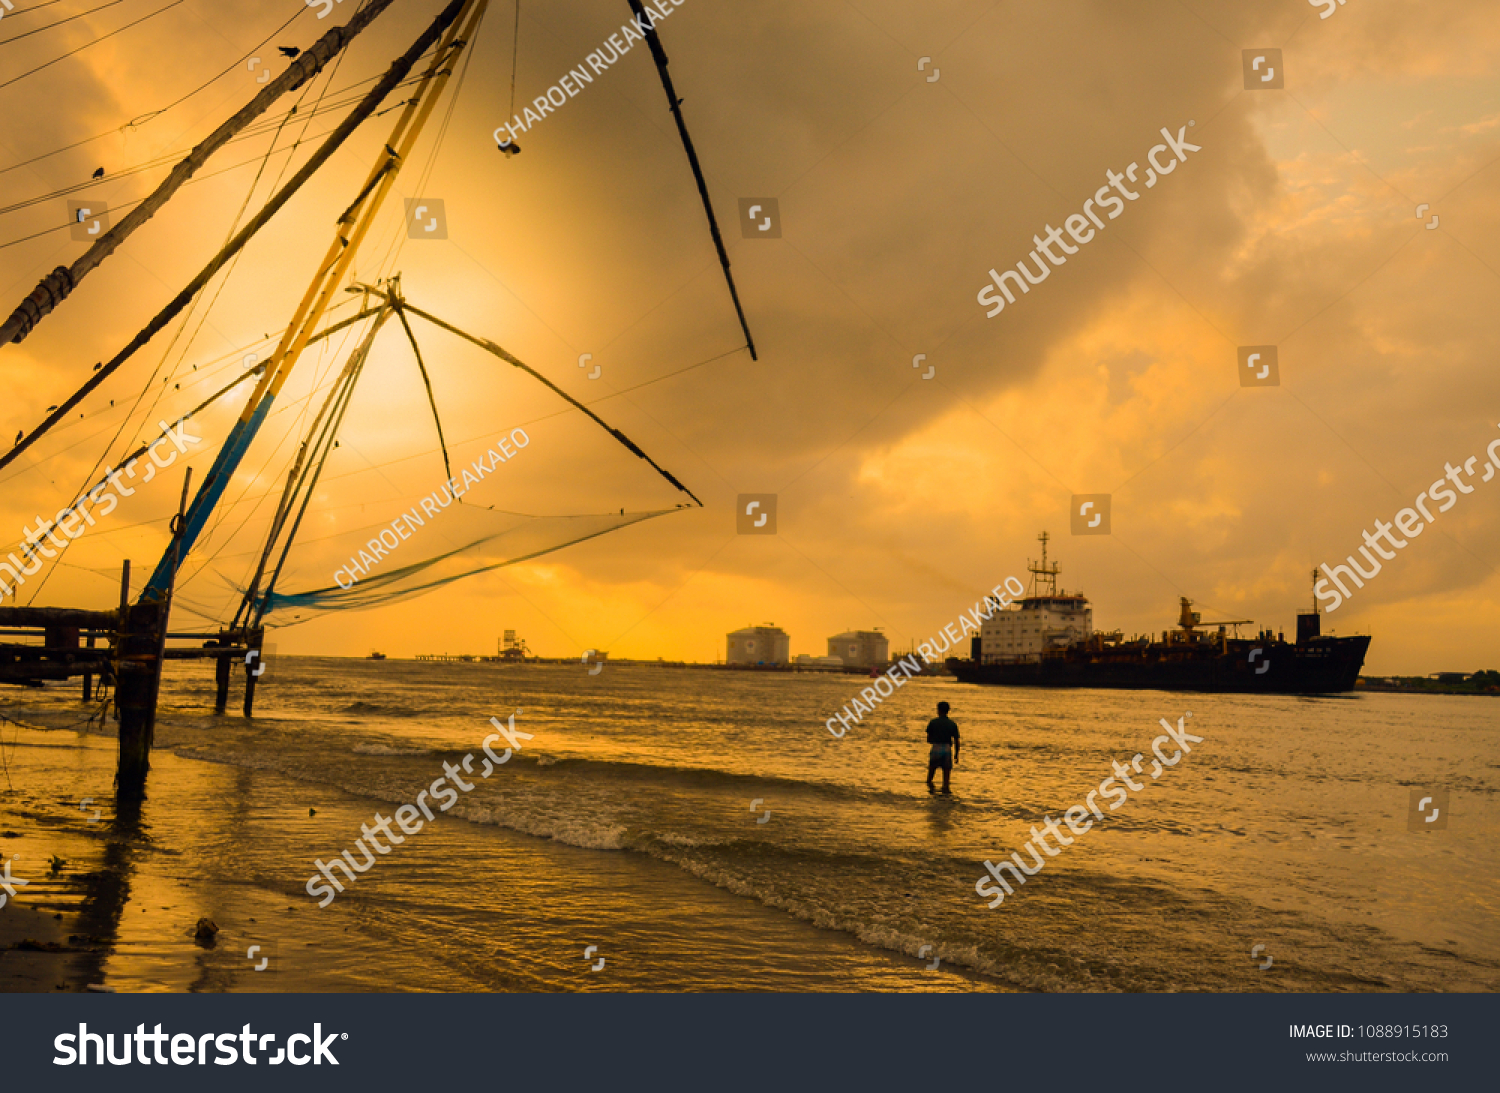 Silhouette Image Indian Style Fish Traps Vintage Stock Image